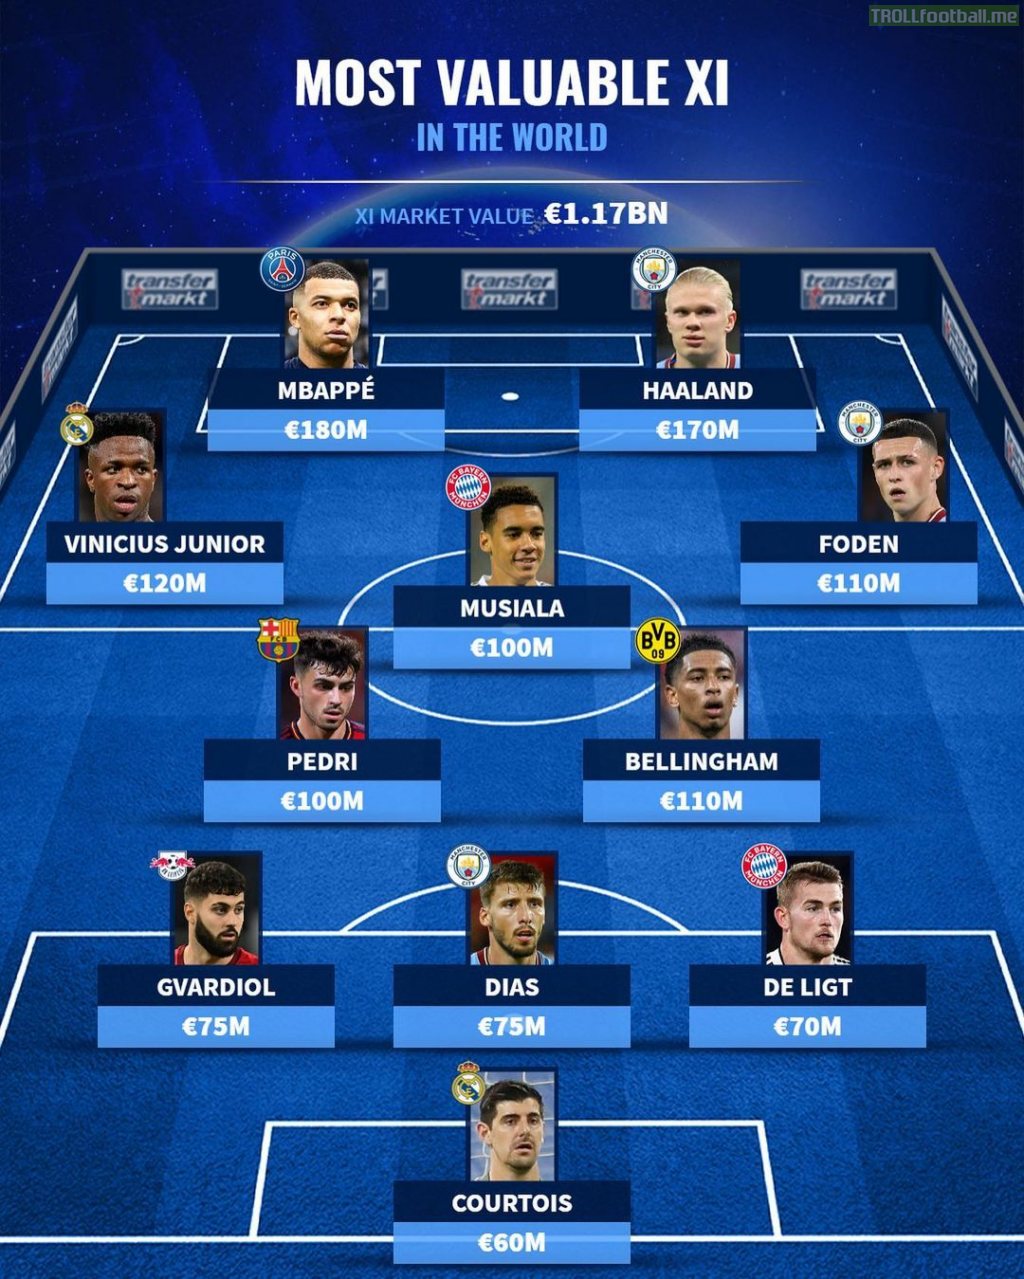 [Transfermarkt] The most valuable XI in the world